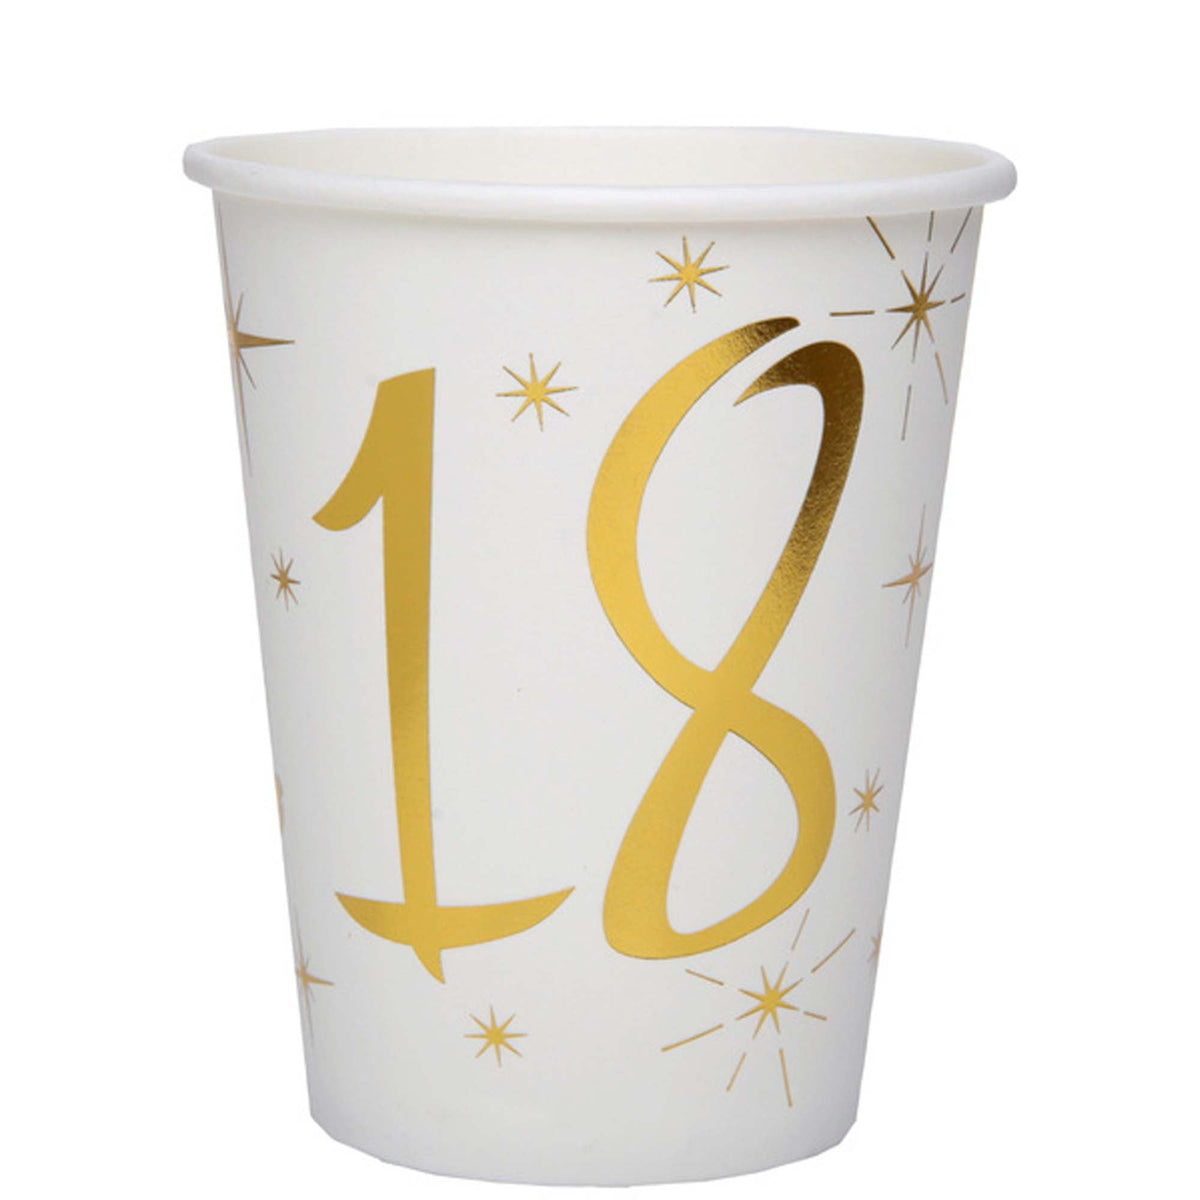 SANTEX General Birthday Starry Golden Age 18th Birthday Party Paper Cups, 9 Oz, 10 Count 3660380040453